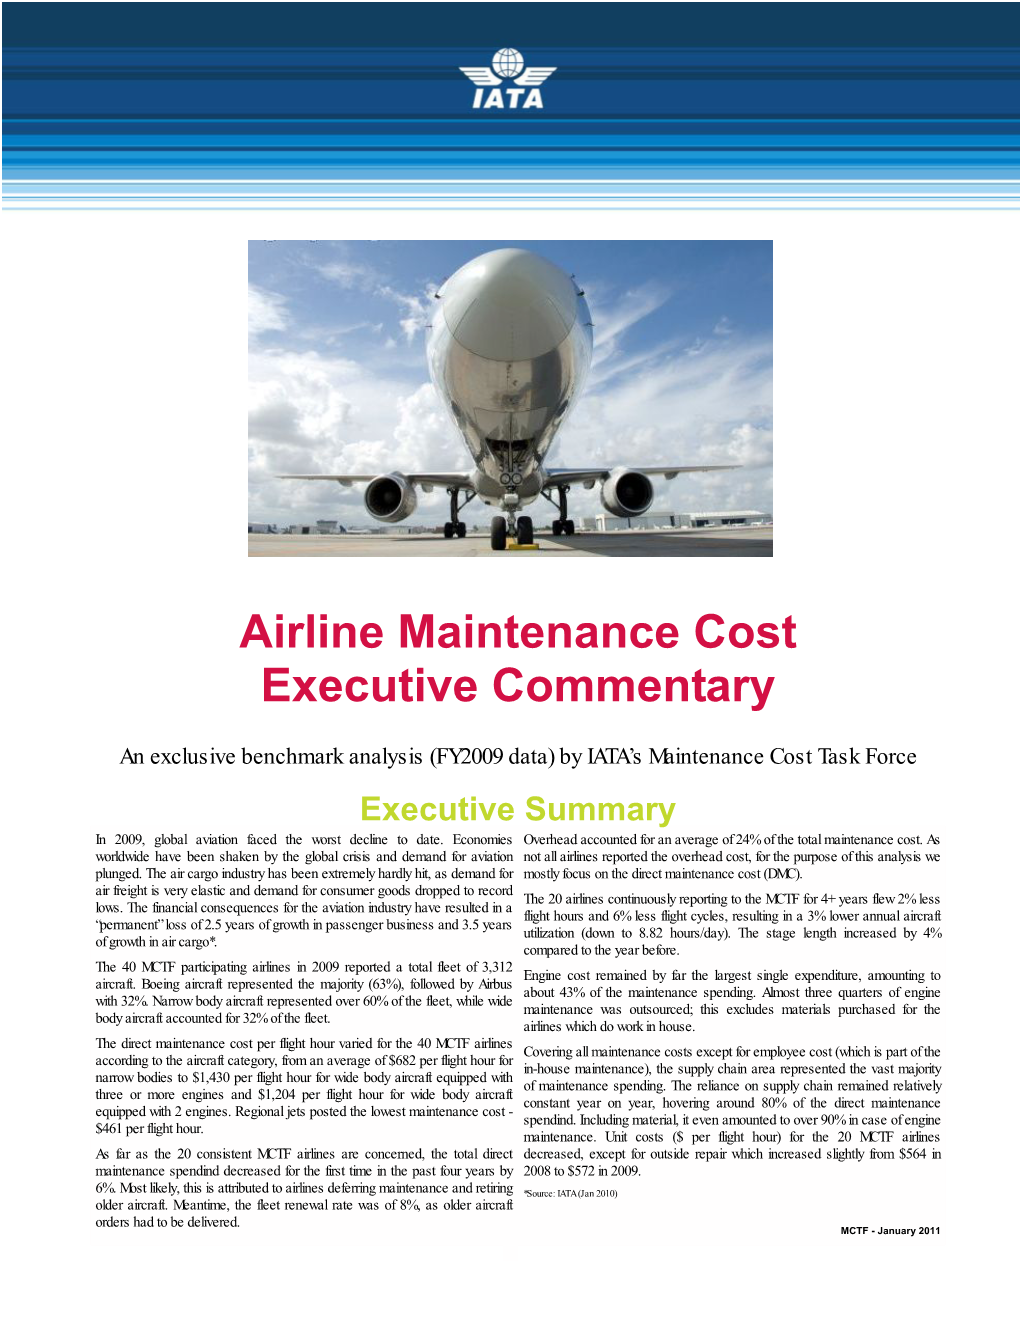 Airline Maintenance Cost Executive Commentary - January 2011